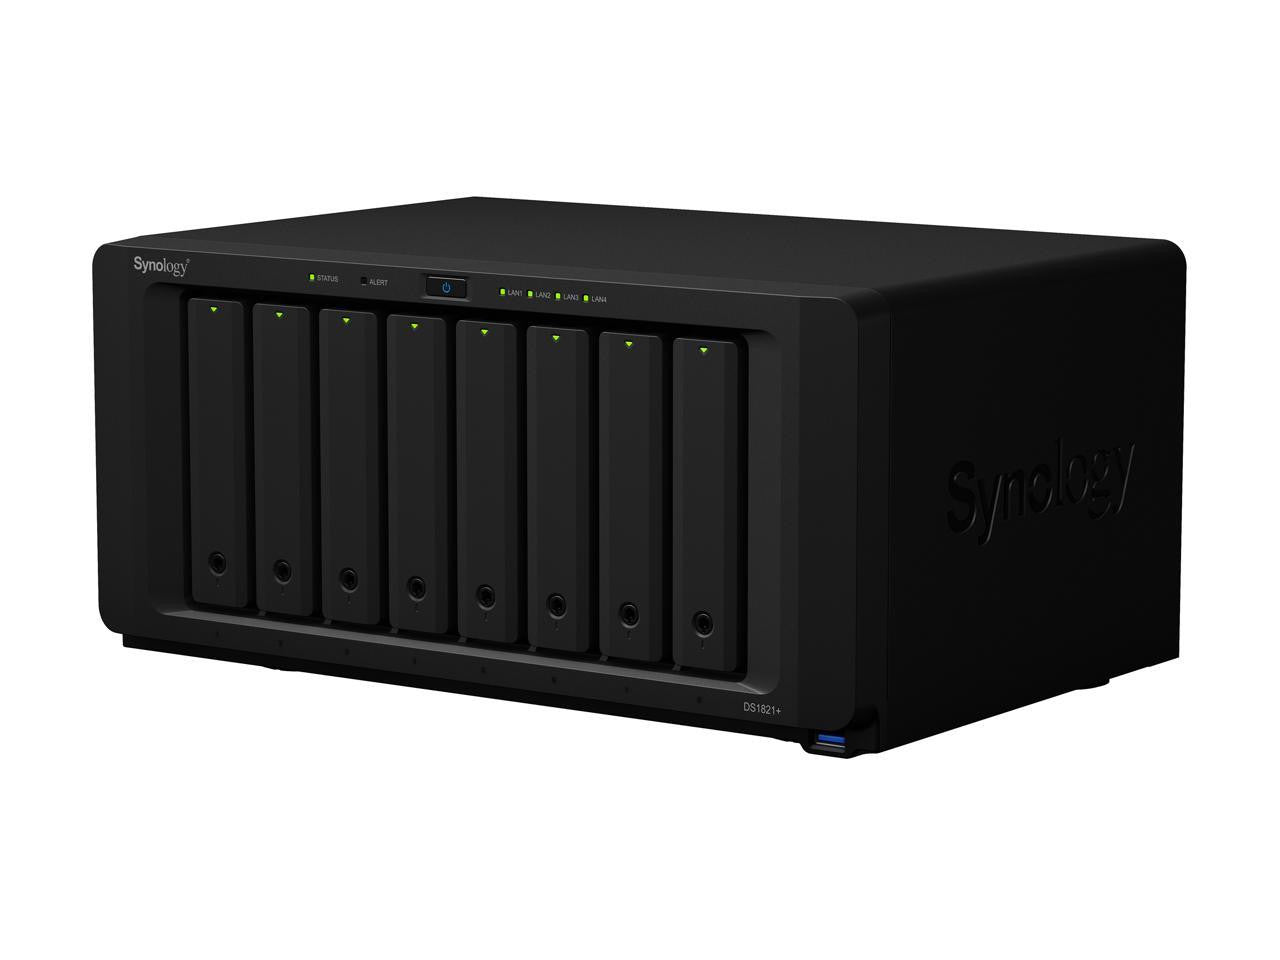 Synology DS1821+ 8-BAY DiskStation with 32GB Synology RAM and 112TB (8x14TB) Western Digital RED PLUS Drives Fully Assembled and Tested